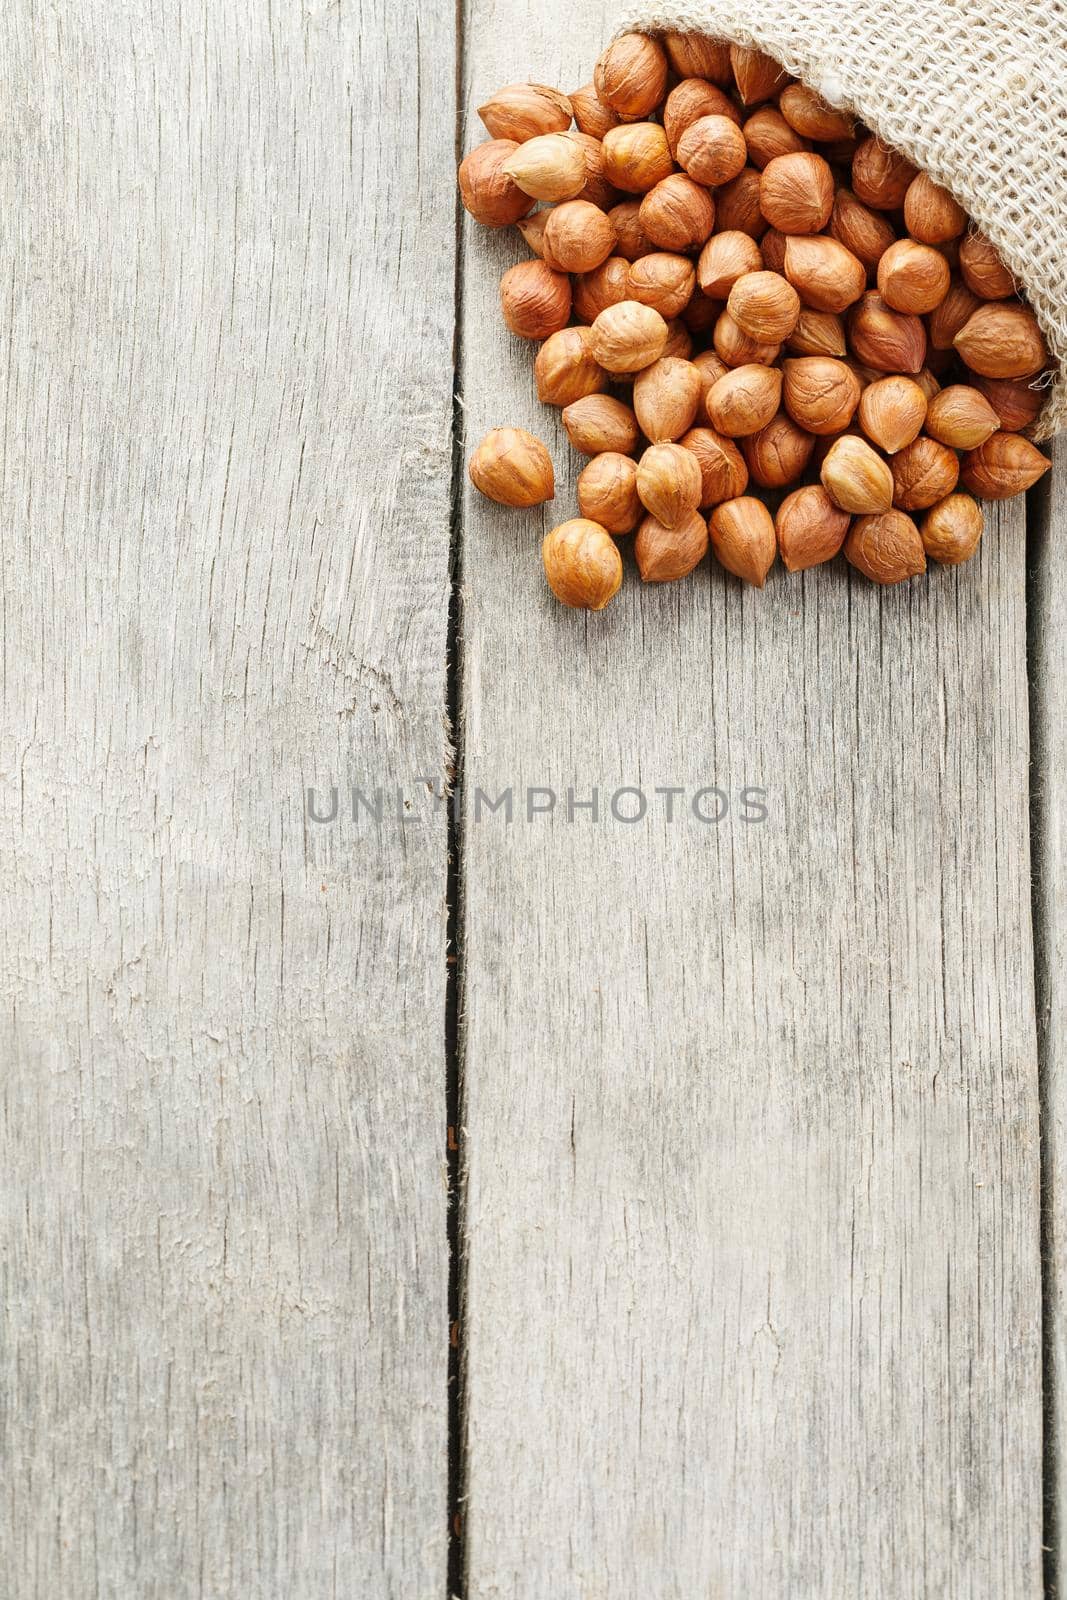 Chiselled hazelnuts in a bag of burlap on a gray wooden table. Organic Fresh Harvested. Without shell healthy vegetarian super food.